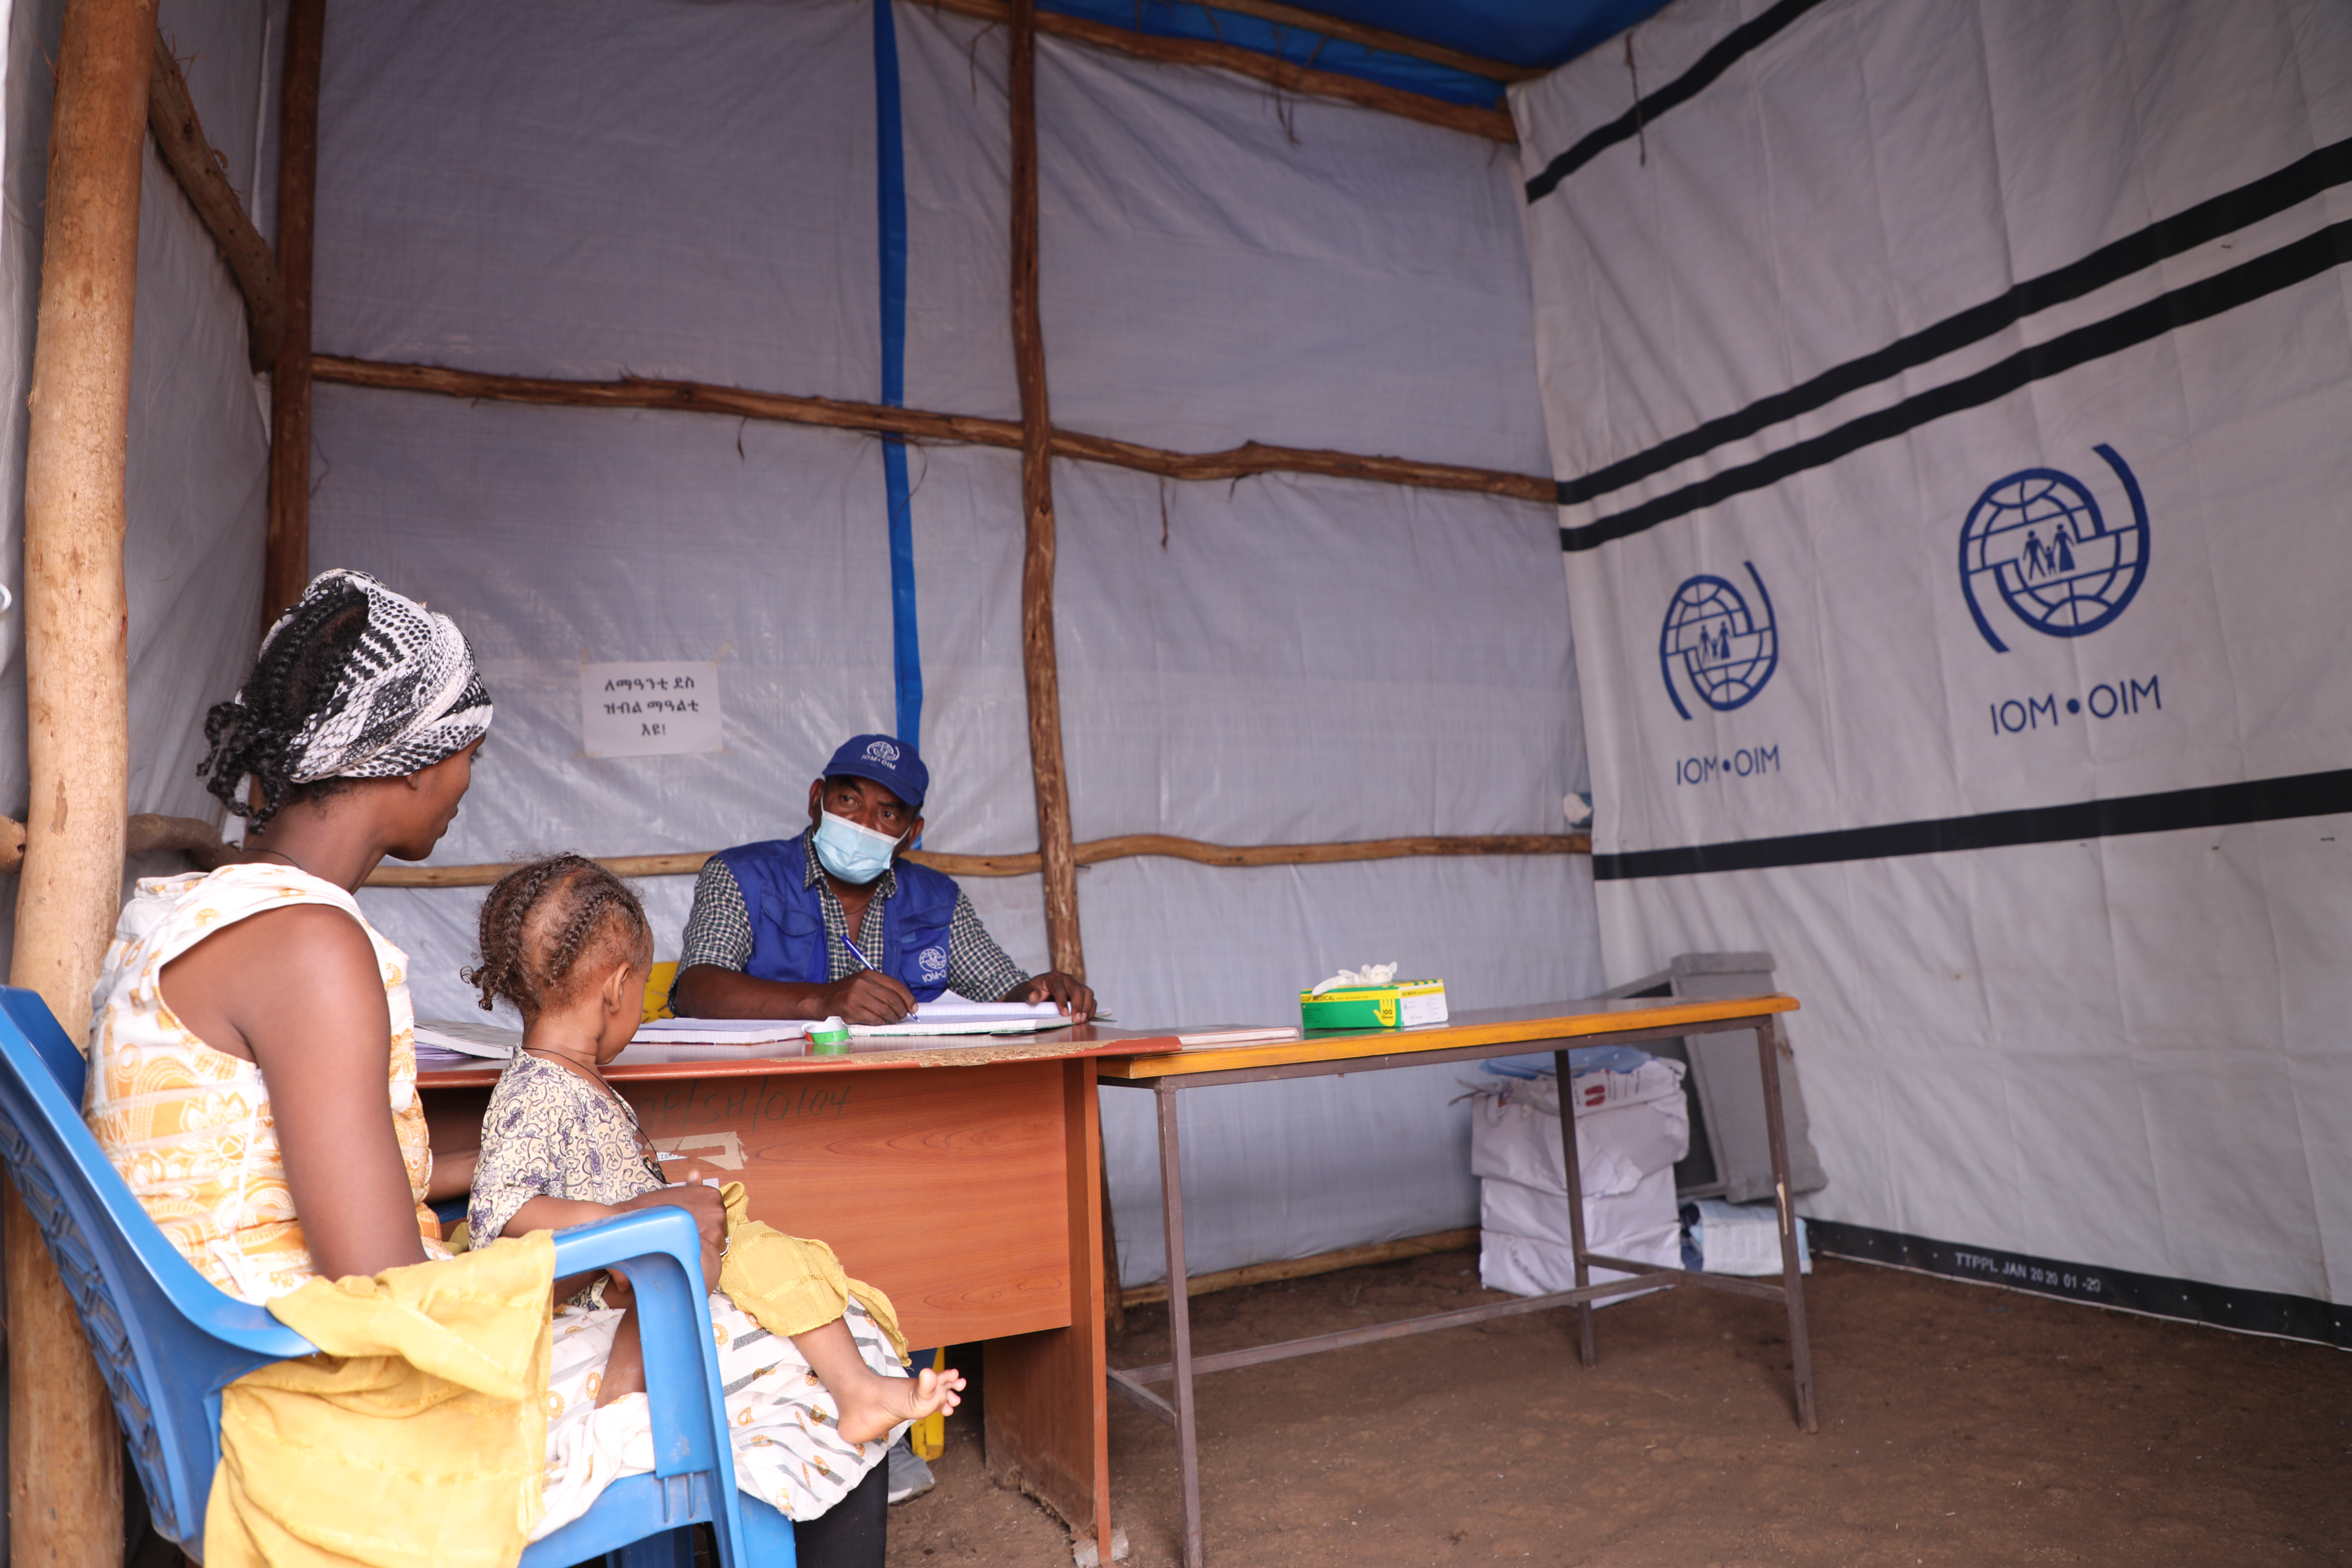 OM provides various health assistance to IDPs in northern Ethiopia. Photo: IOM/Kaye Viray